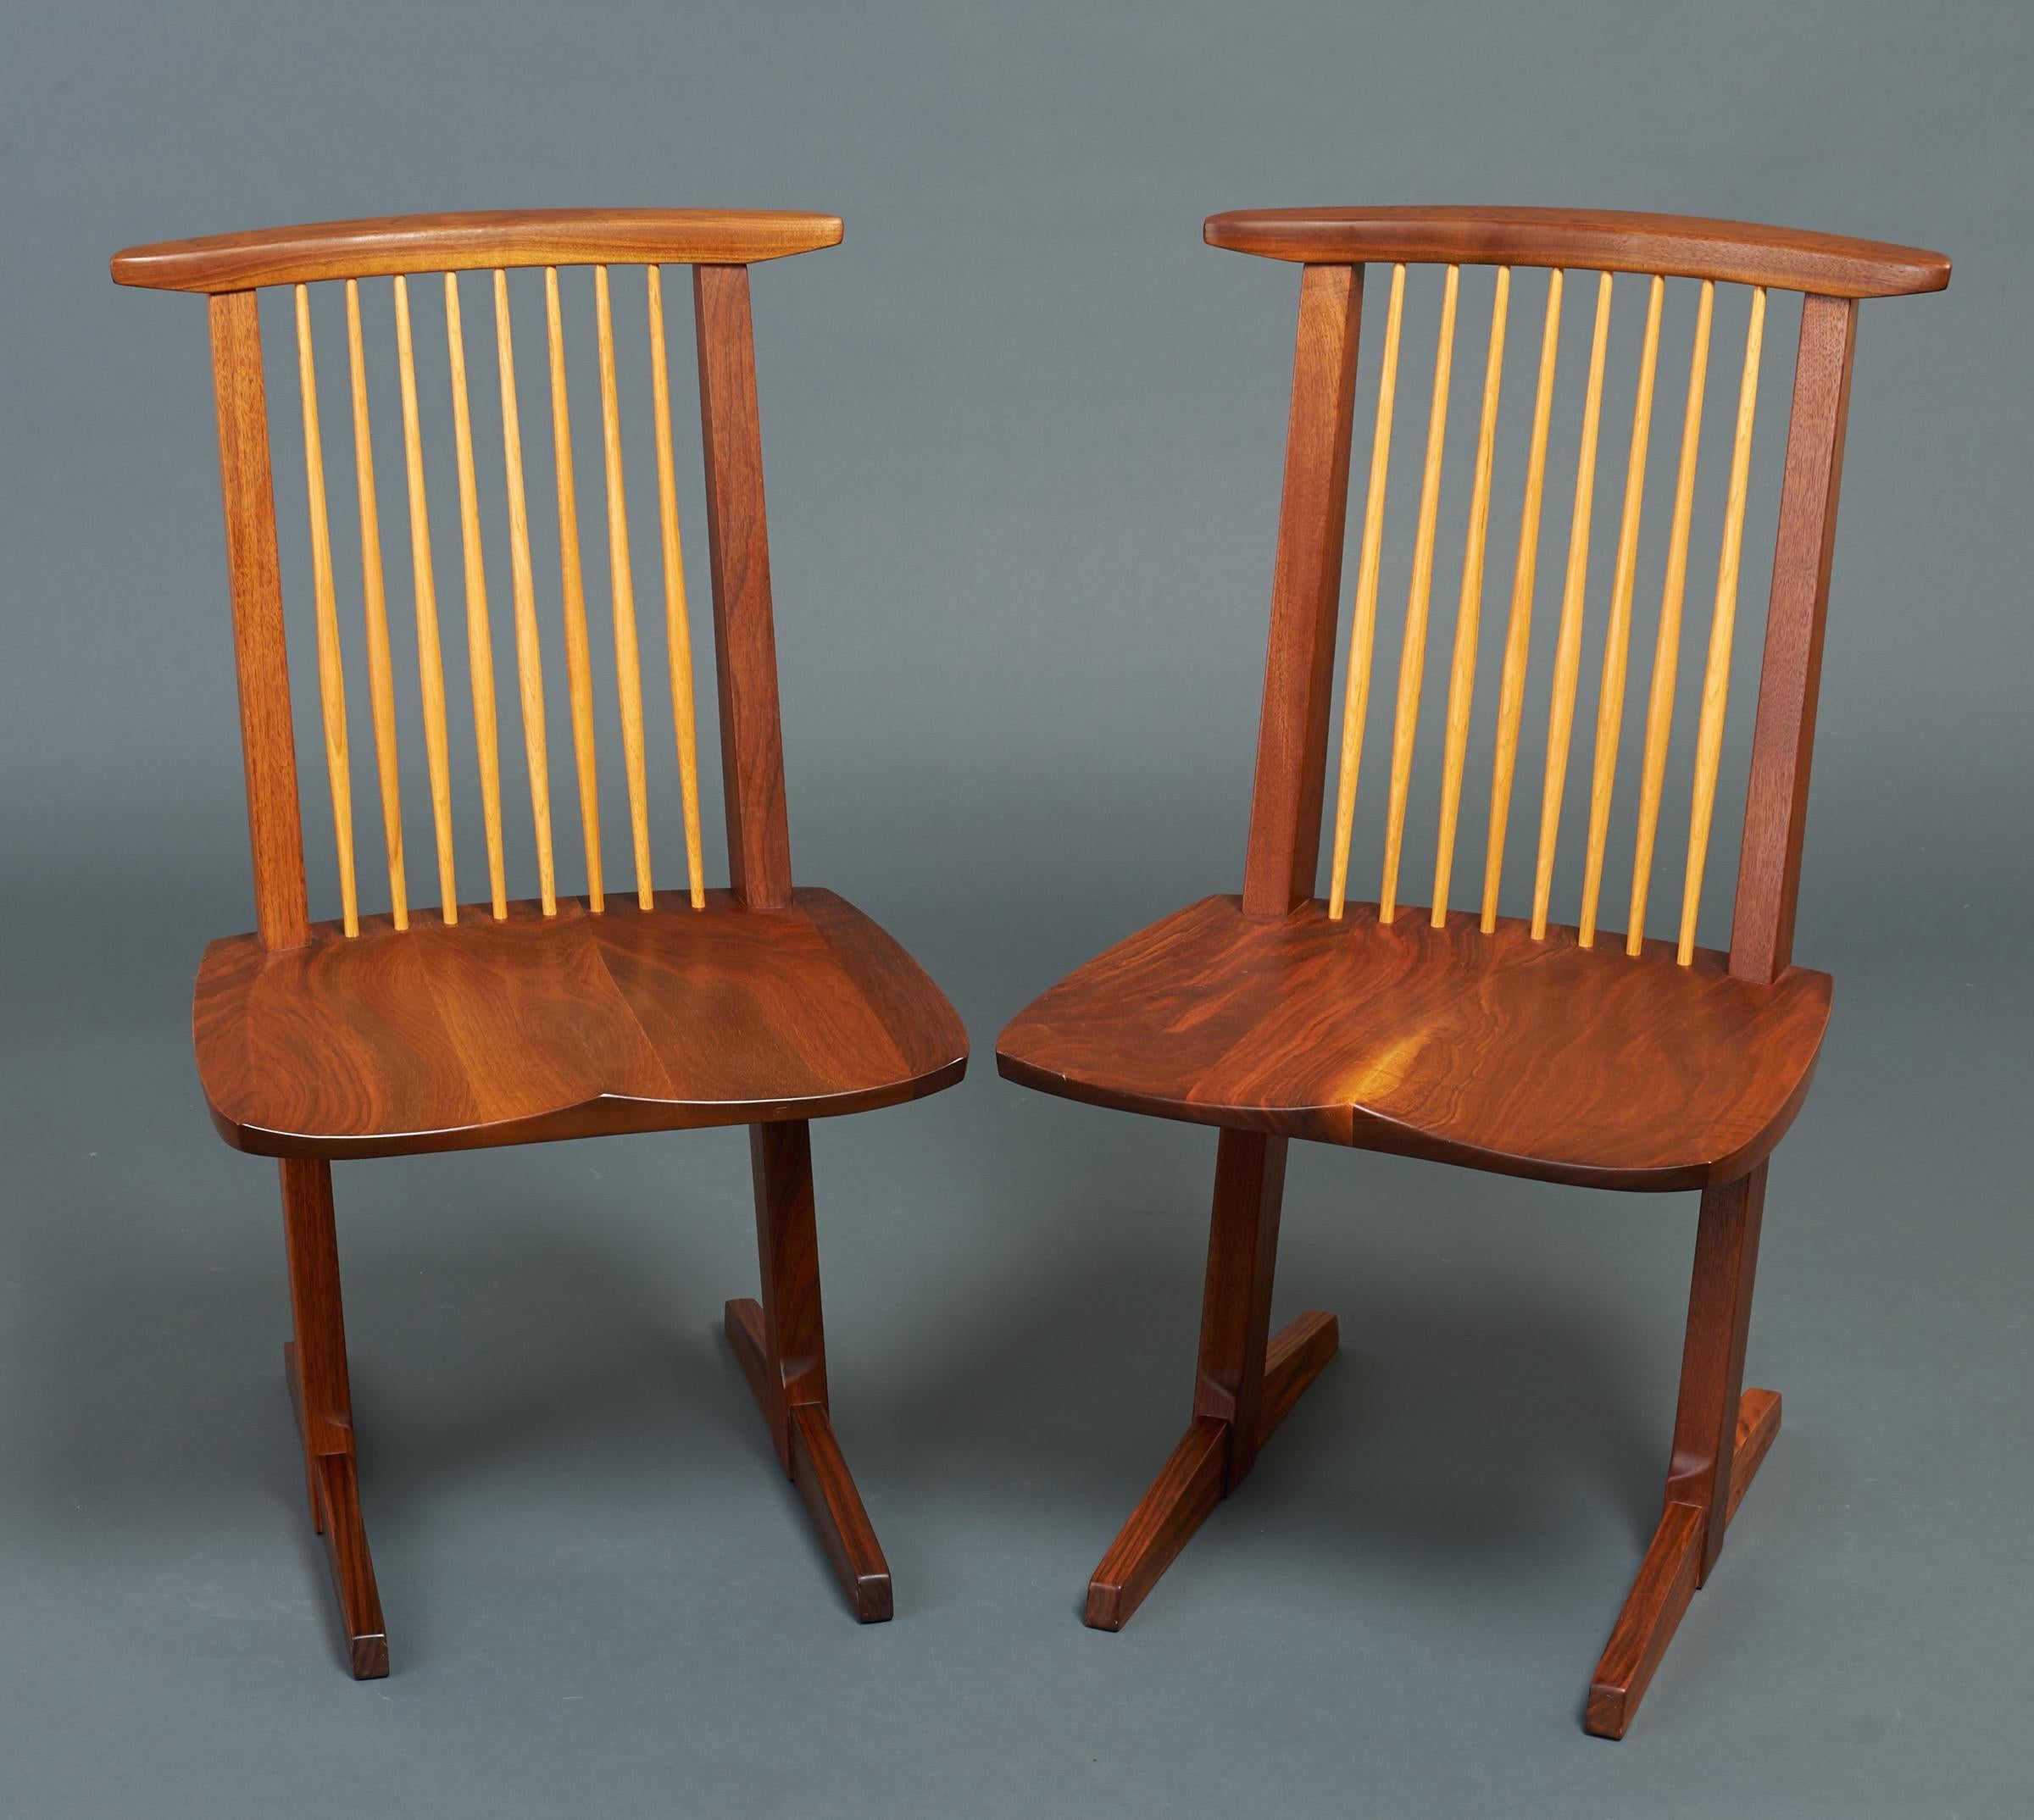 George Nakashima, Rare Sculptural Pair of Conoid Chairs in Walnut, Signed, 1989 For Sale 5